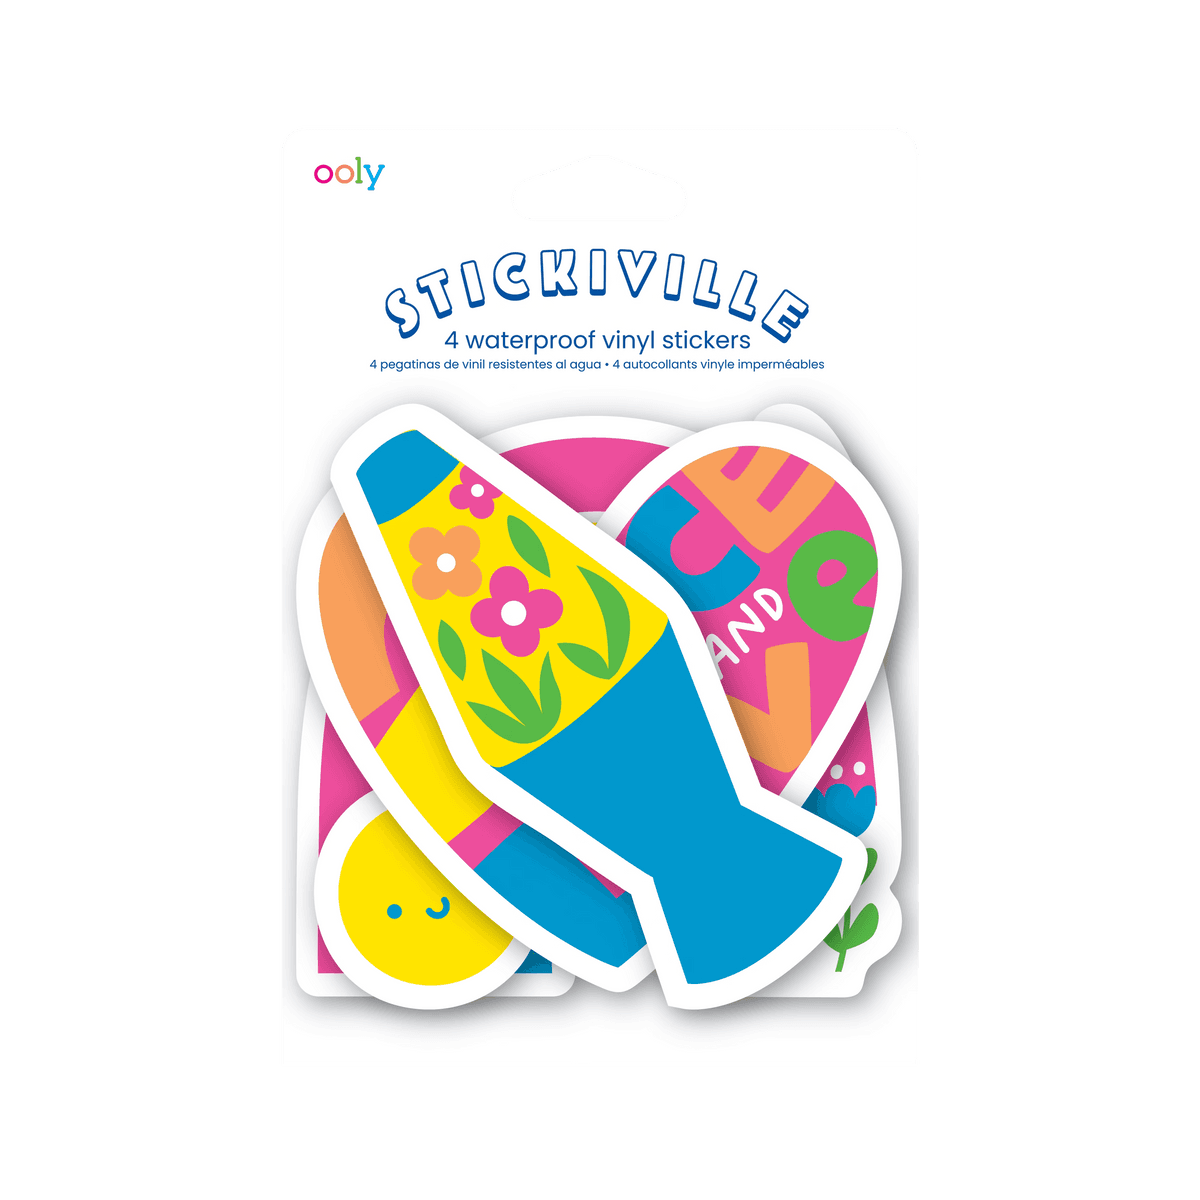 Stickiville Peace and Love vinyl stickers in packaging